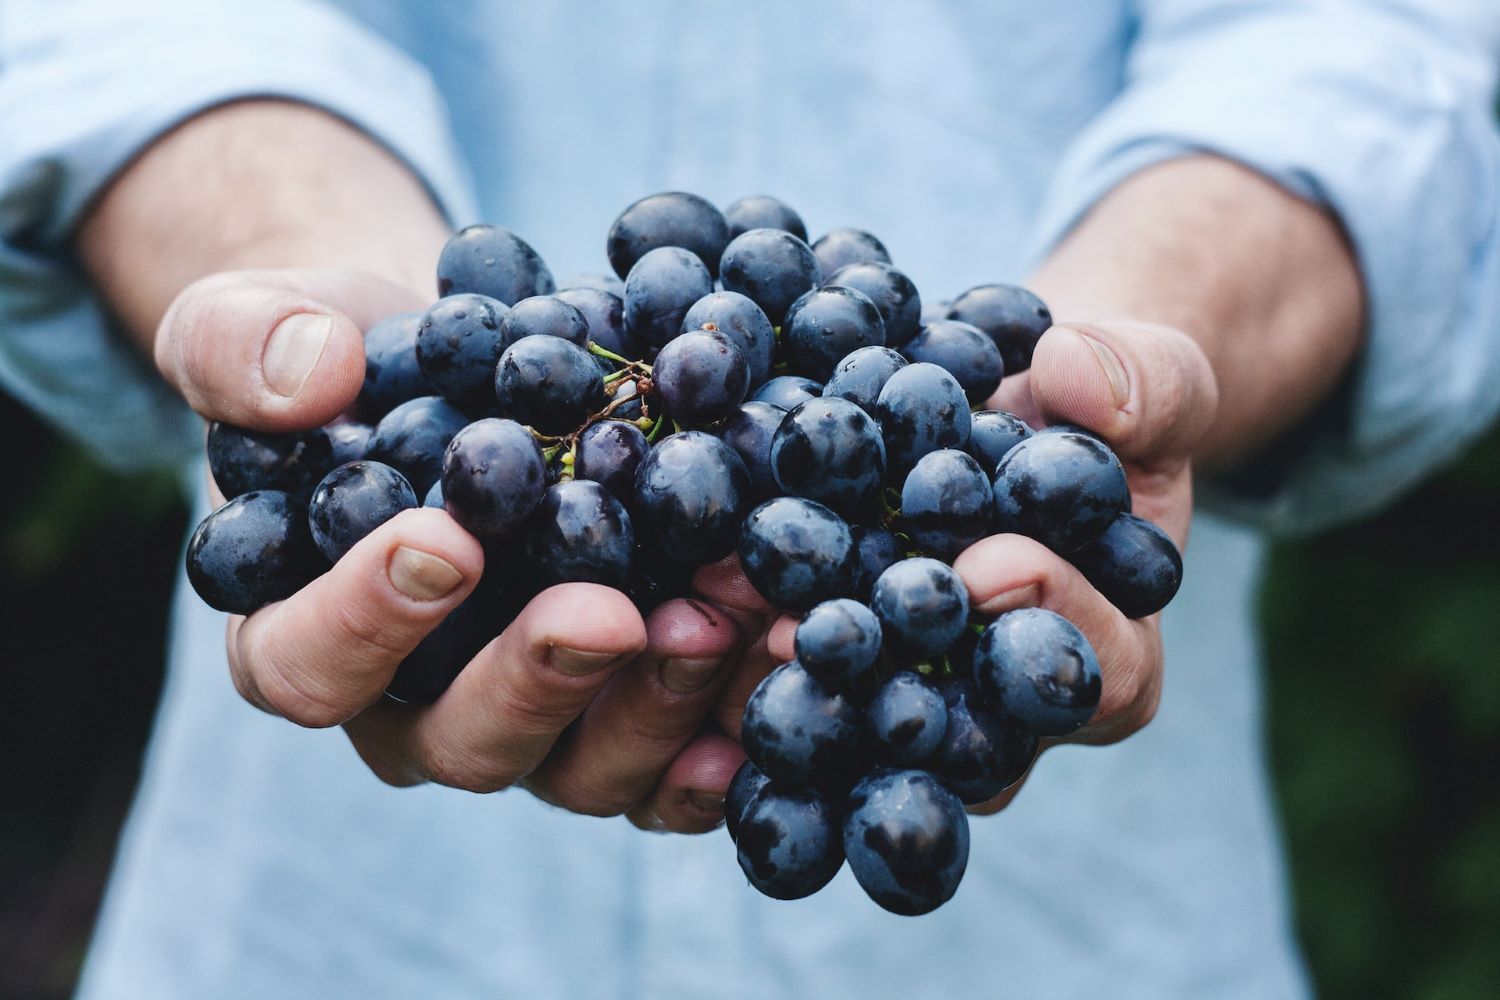 A close-up of a man's hands holding red wine grapes.